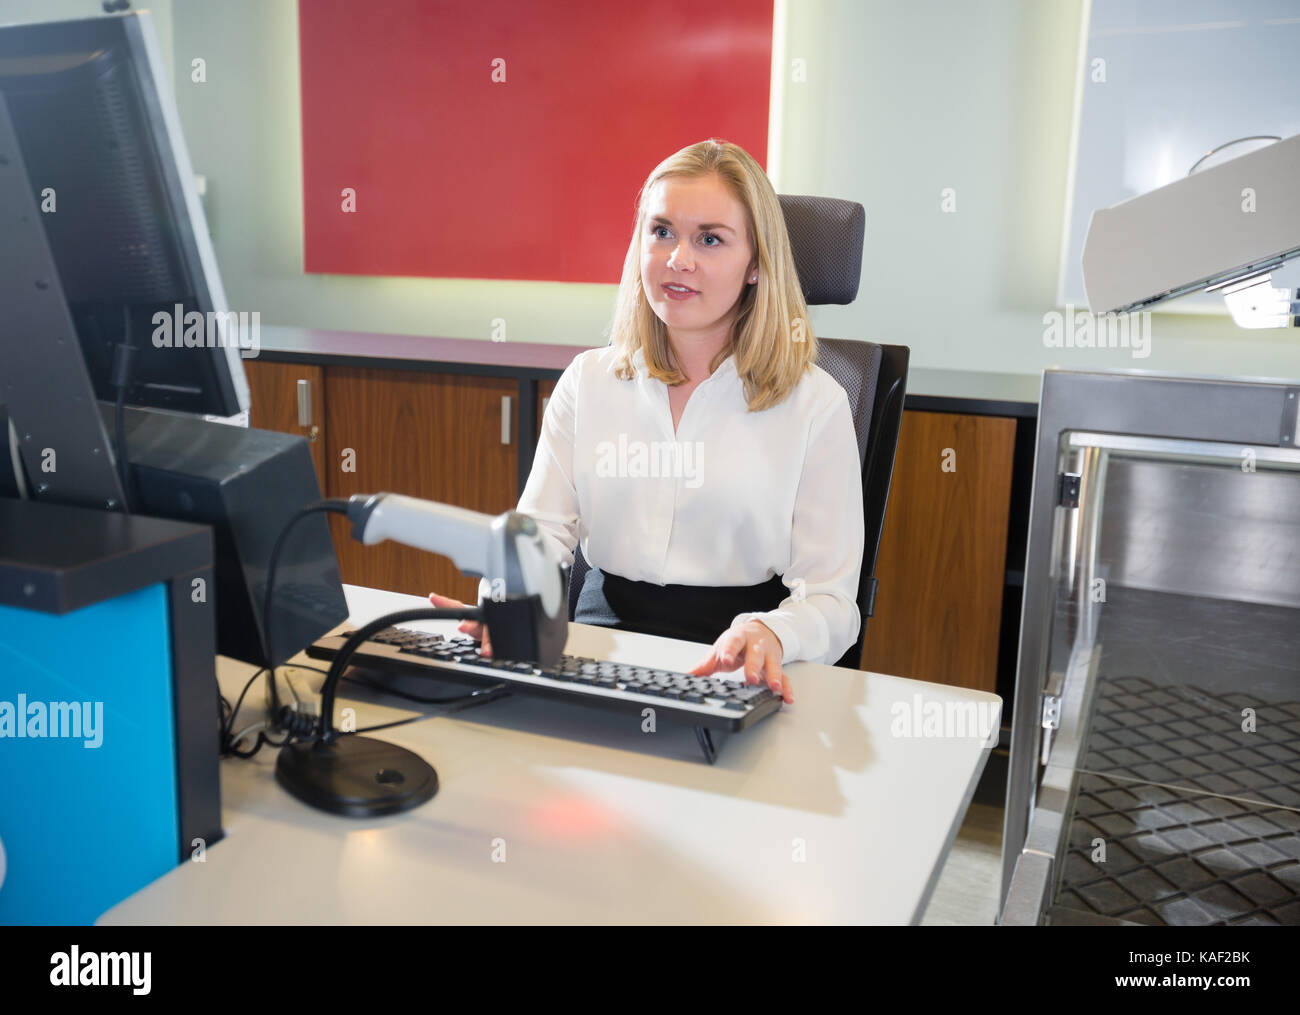 Female Staff Using Computer At Airport Check-in Stock Photo